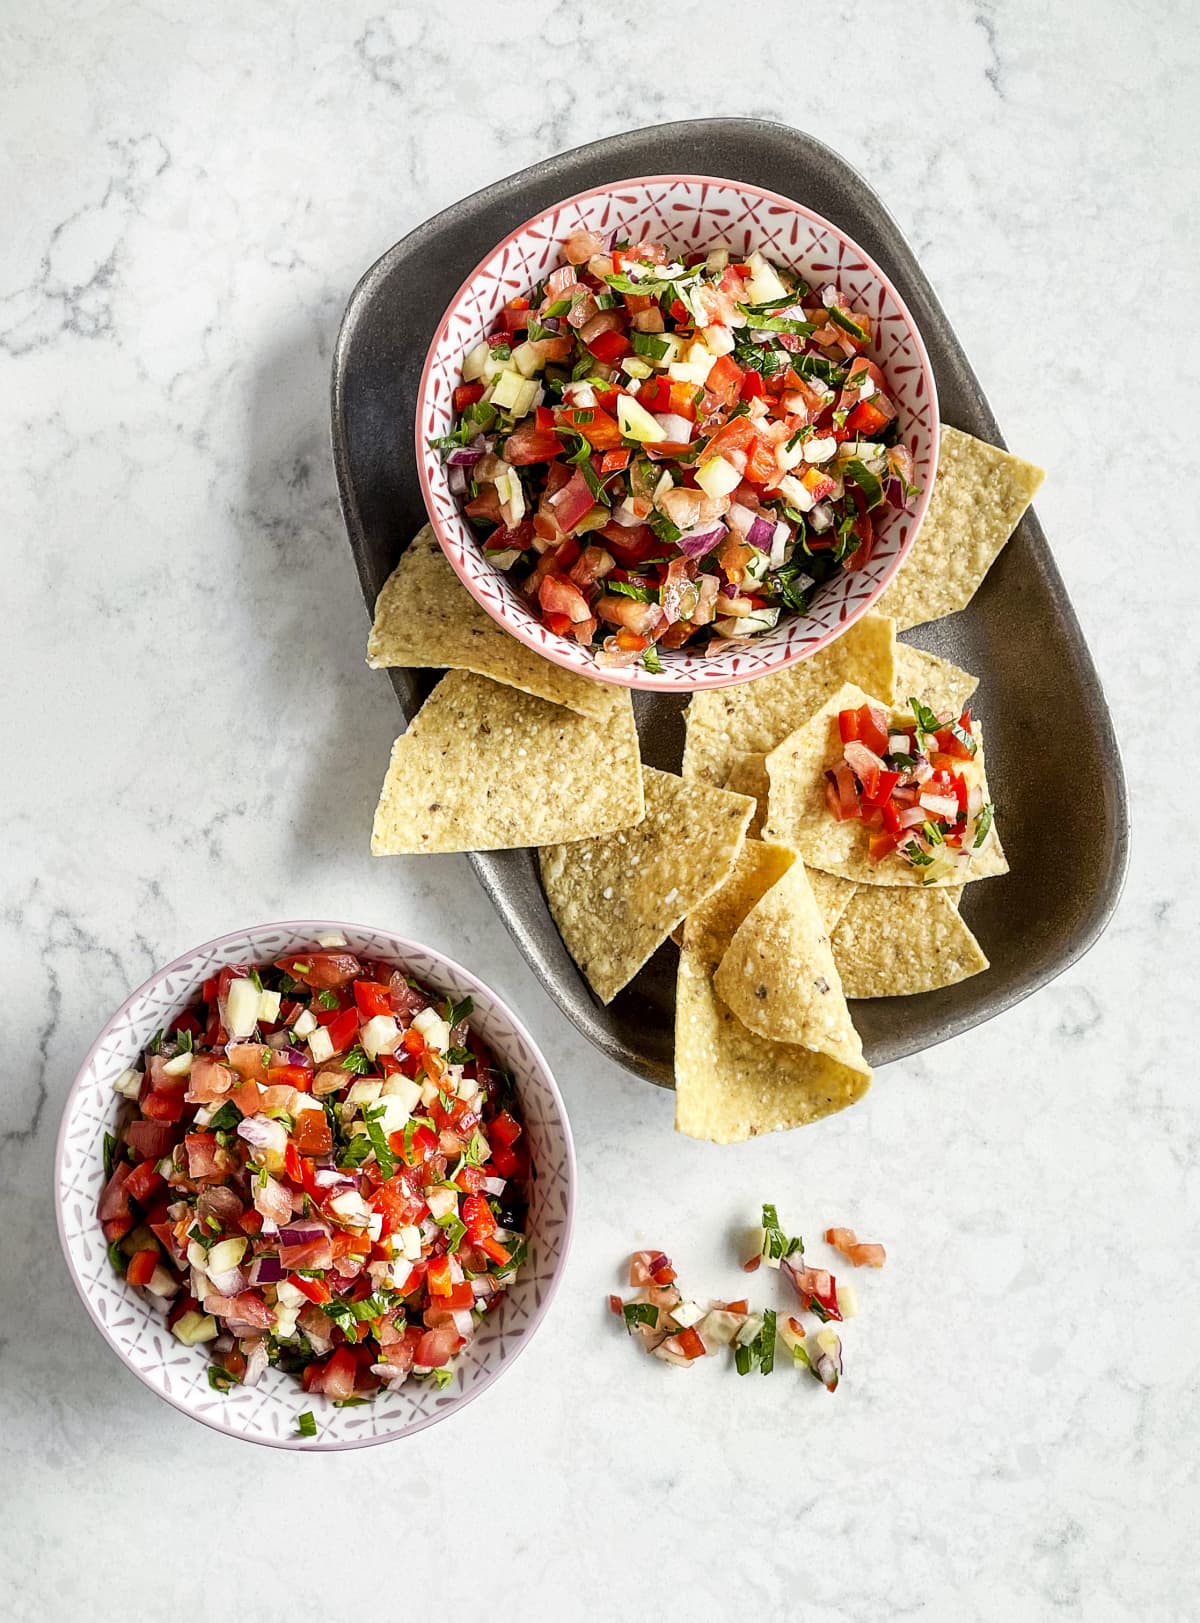 Bowls of salsa with tortilla chips on a white marbled surface